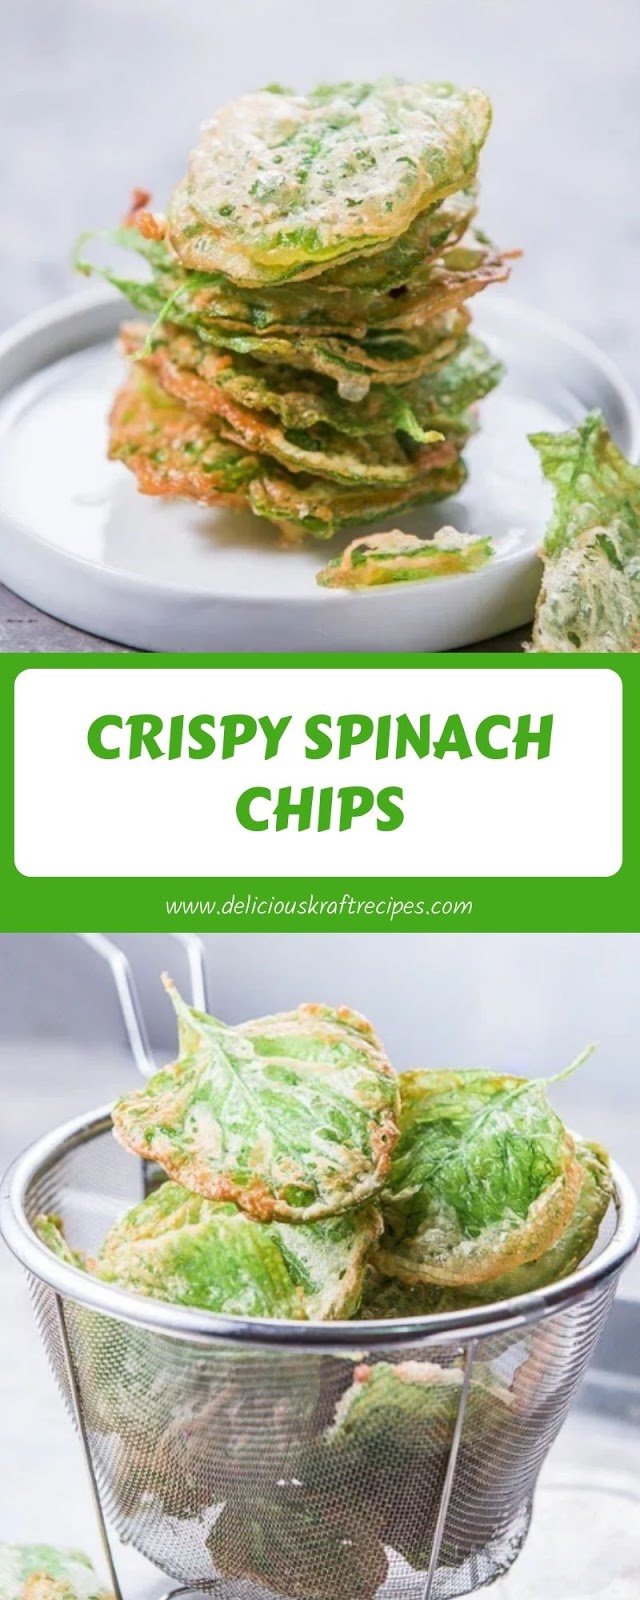 CRISPY SPINACH CHIPS